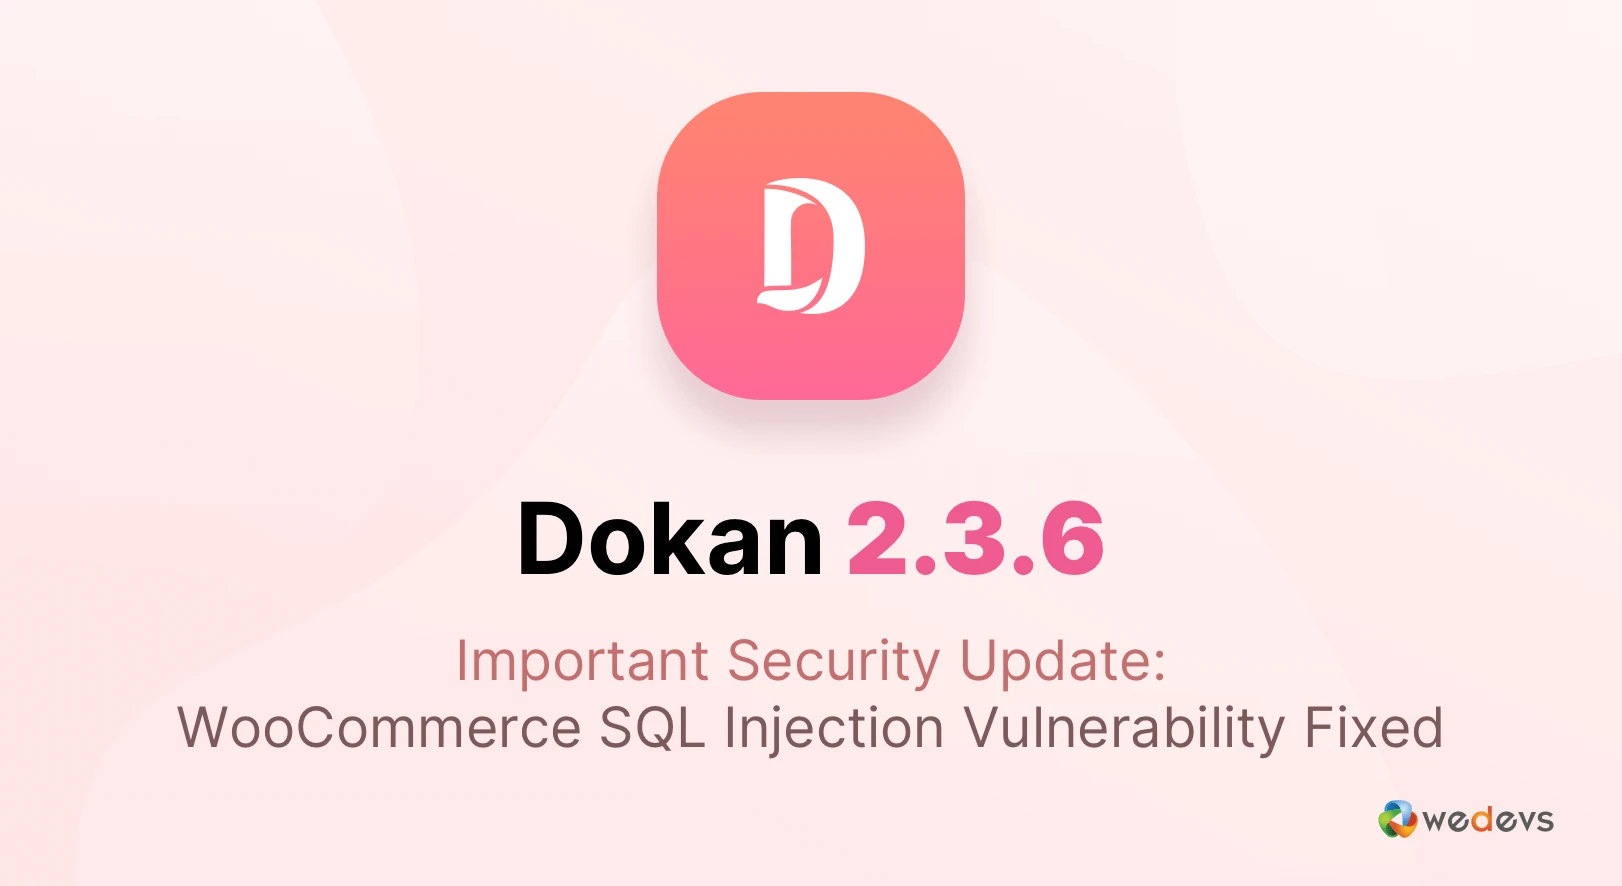 Important Security Update: WooCommerce SQL Injection Vulnerability Fixed in version 2.3.6